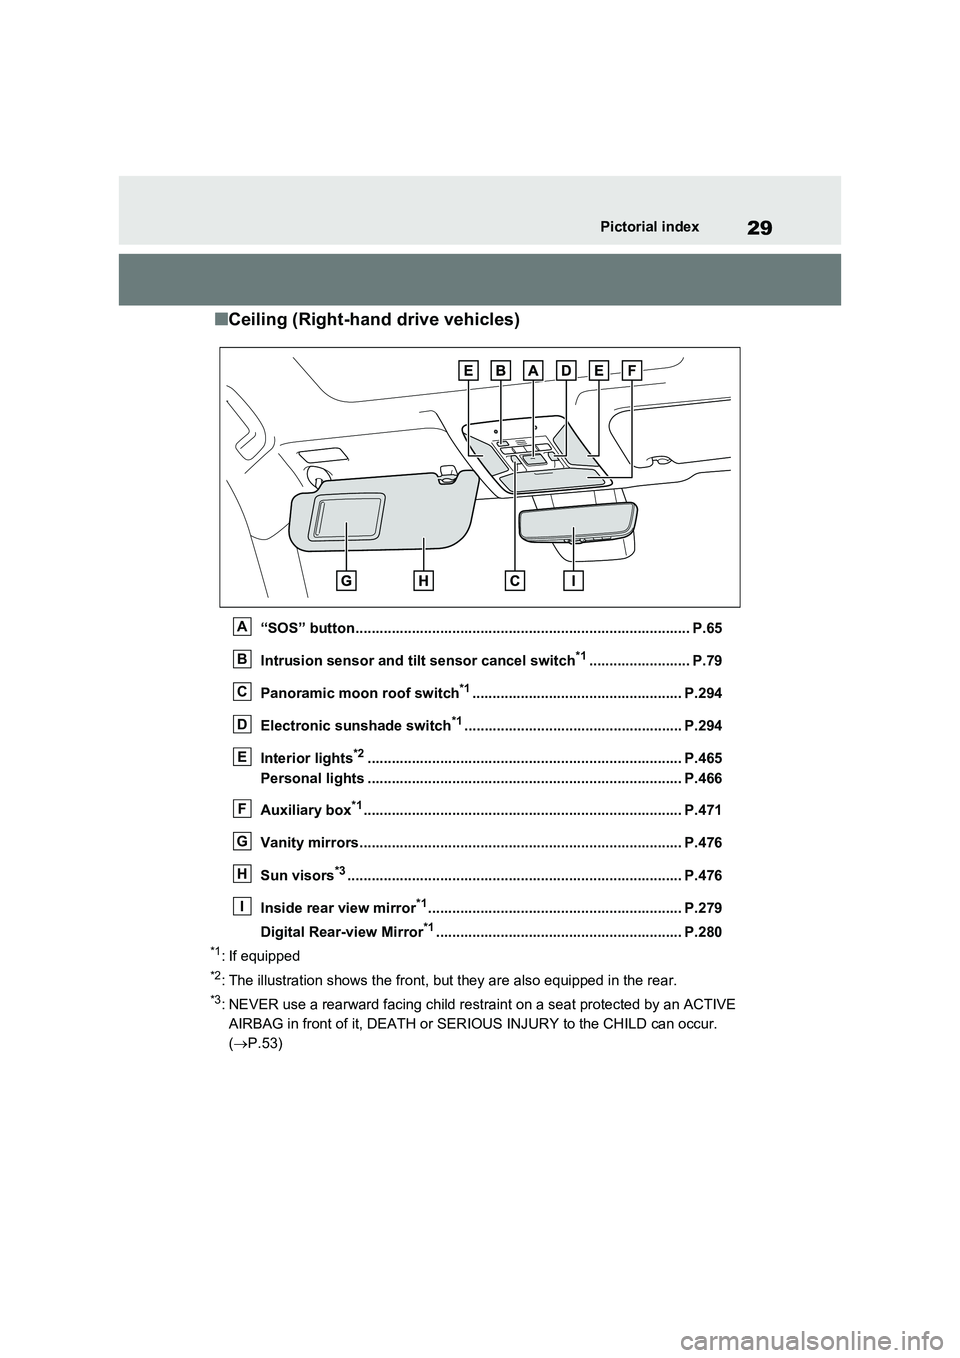 TOYOTA VERSO S 2011  Owners Manual 29Pictorial index
■Ceiling (Right-hand drive vehicles)
“SOS” button................................................................................... P.65 
Intrusion sensor and tilt sensor canc